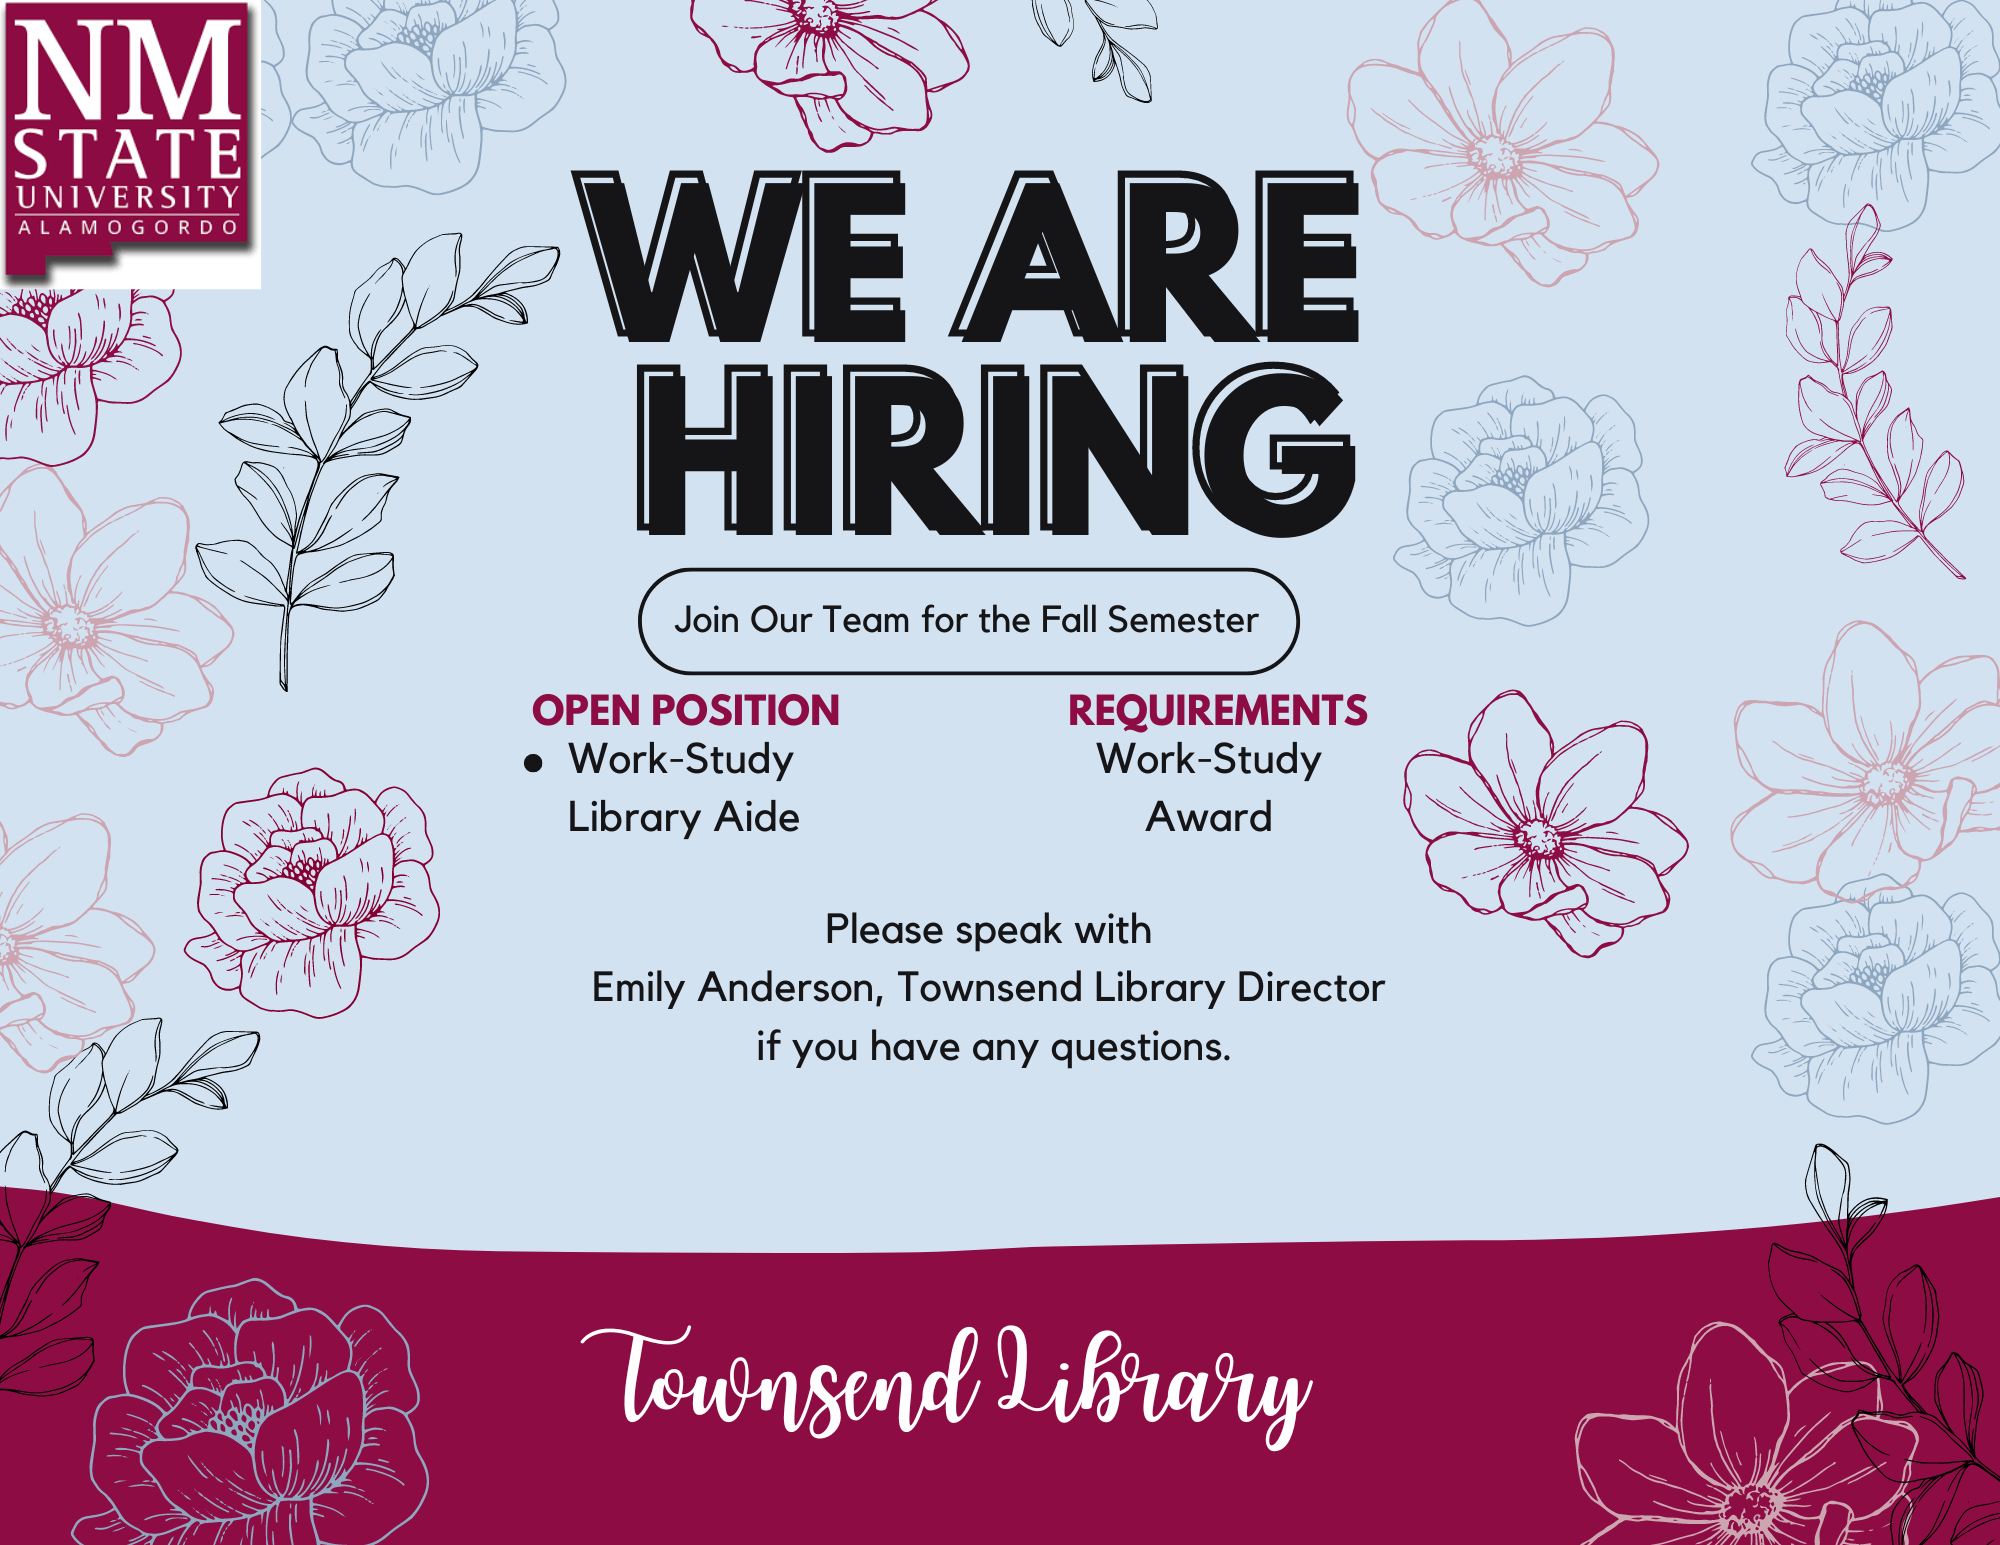 The Townsend Library is hiring a work study for the Spring semester, for further information please speak with the library Director.